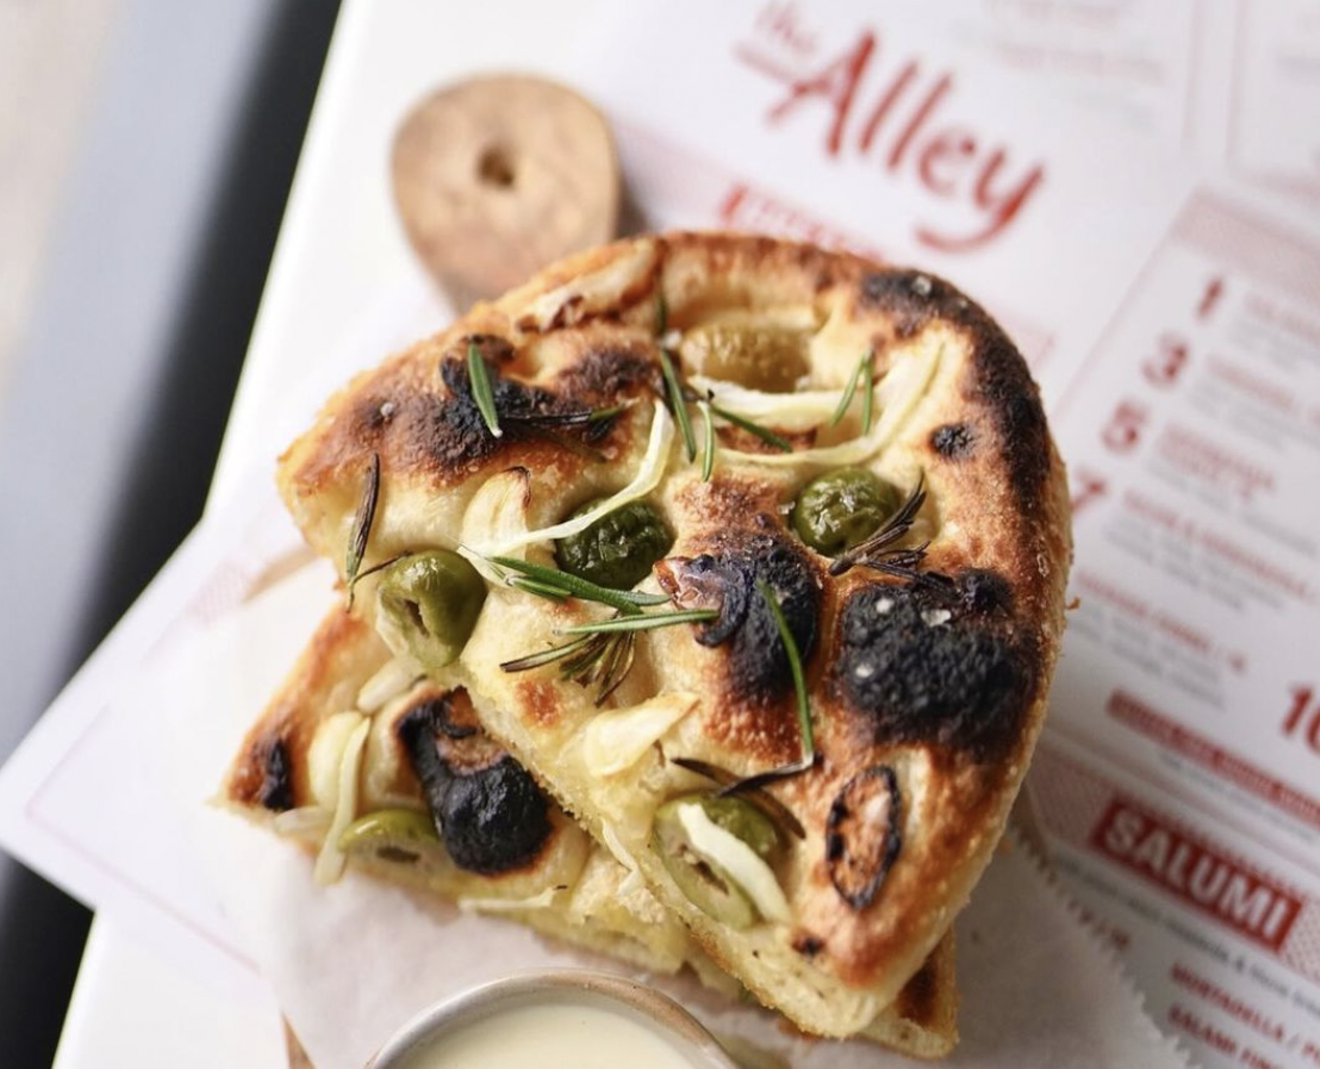 The Alley pizzeria in South Beach at the Betsy Hotel is now open on Collins Avenue.